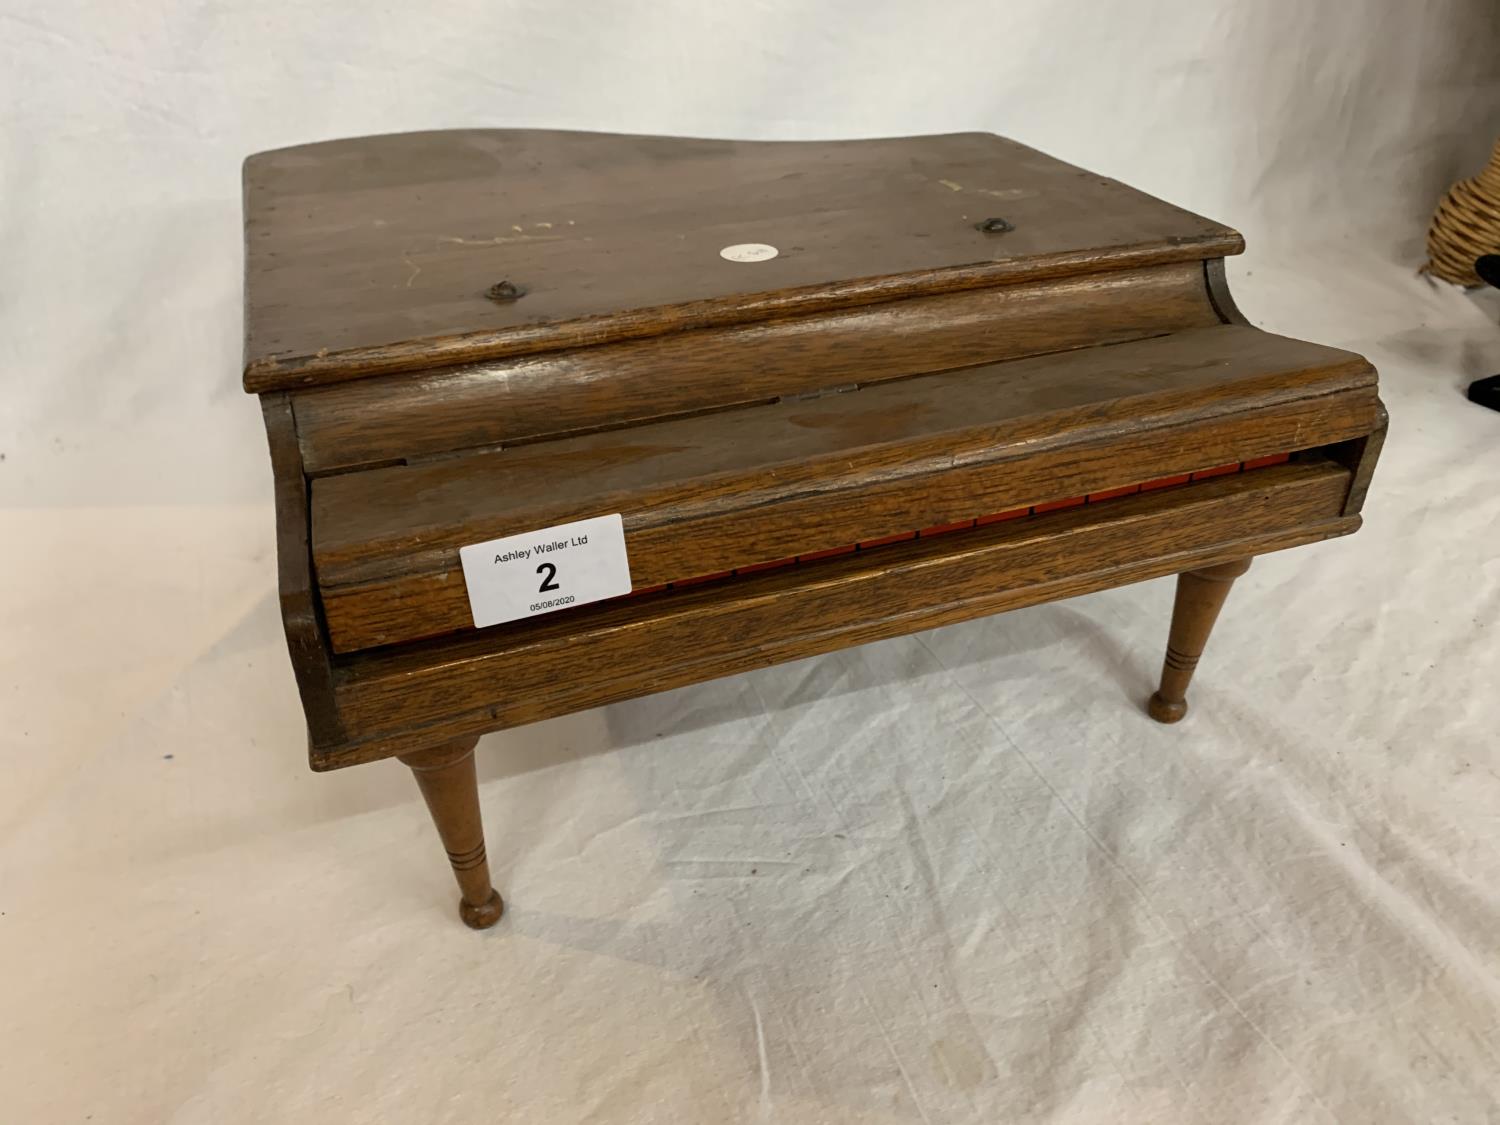 A VINTAGE SMALL PIANO - Image 7 of 8